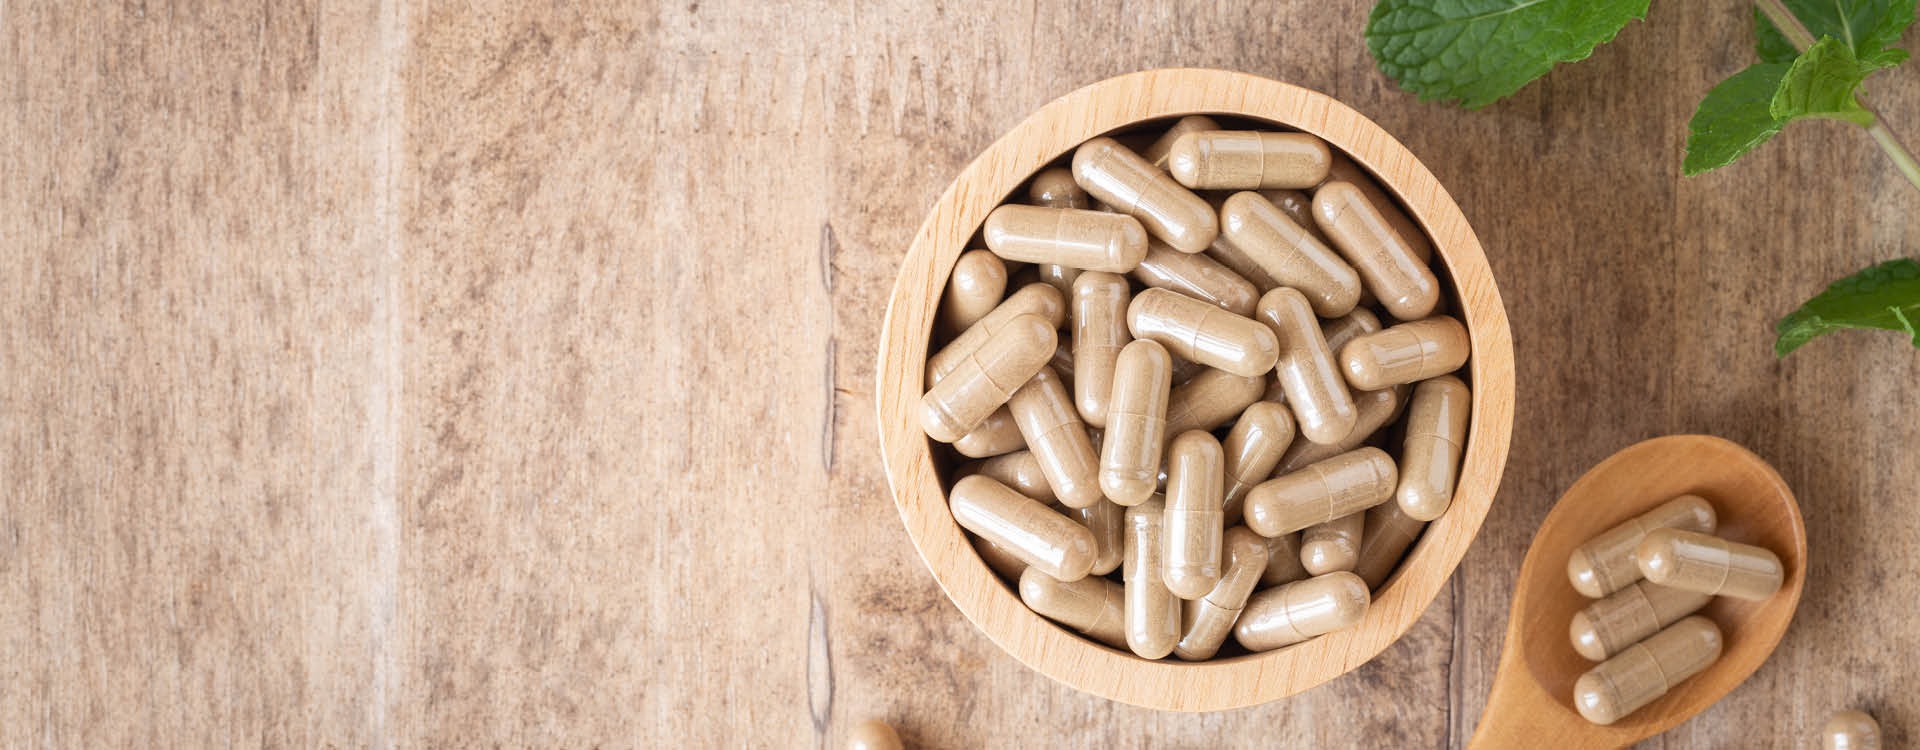 What Is Placenta Encapsulation? Benefits, Risks, & Cost Article Image